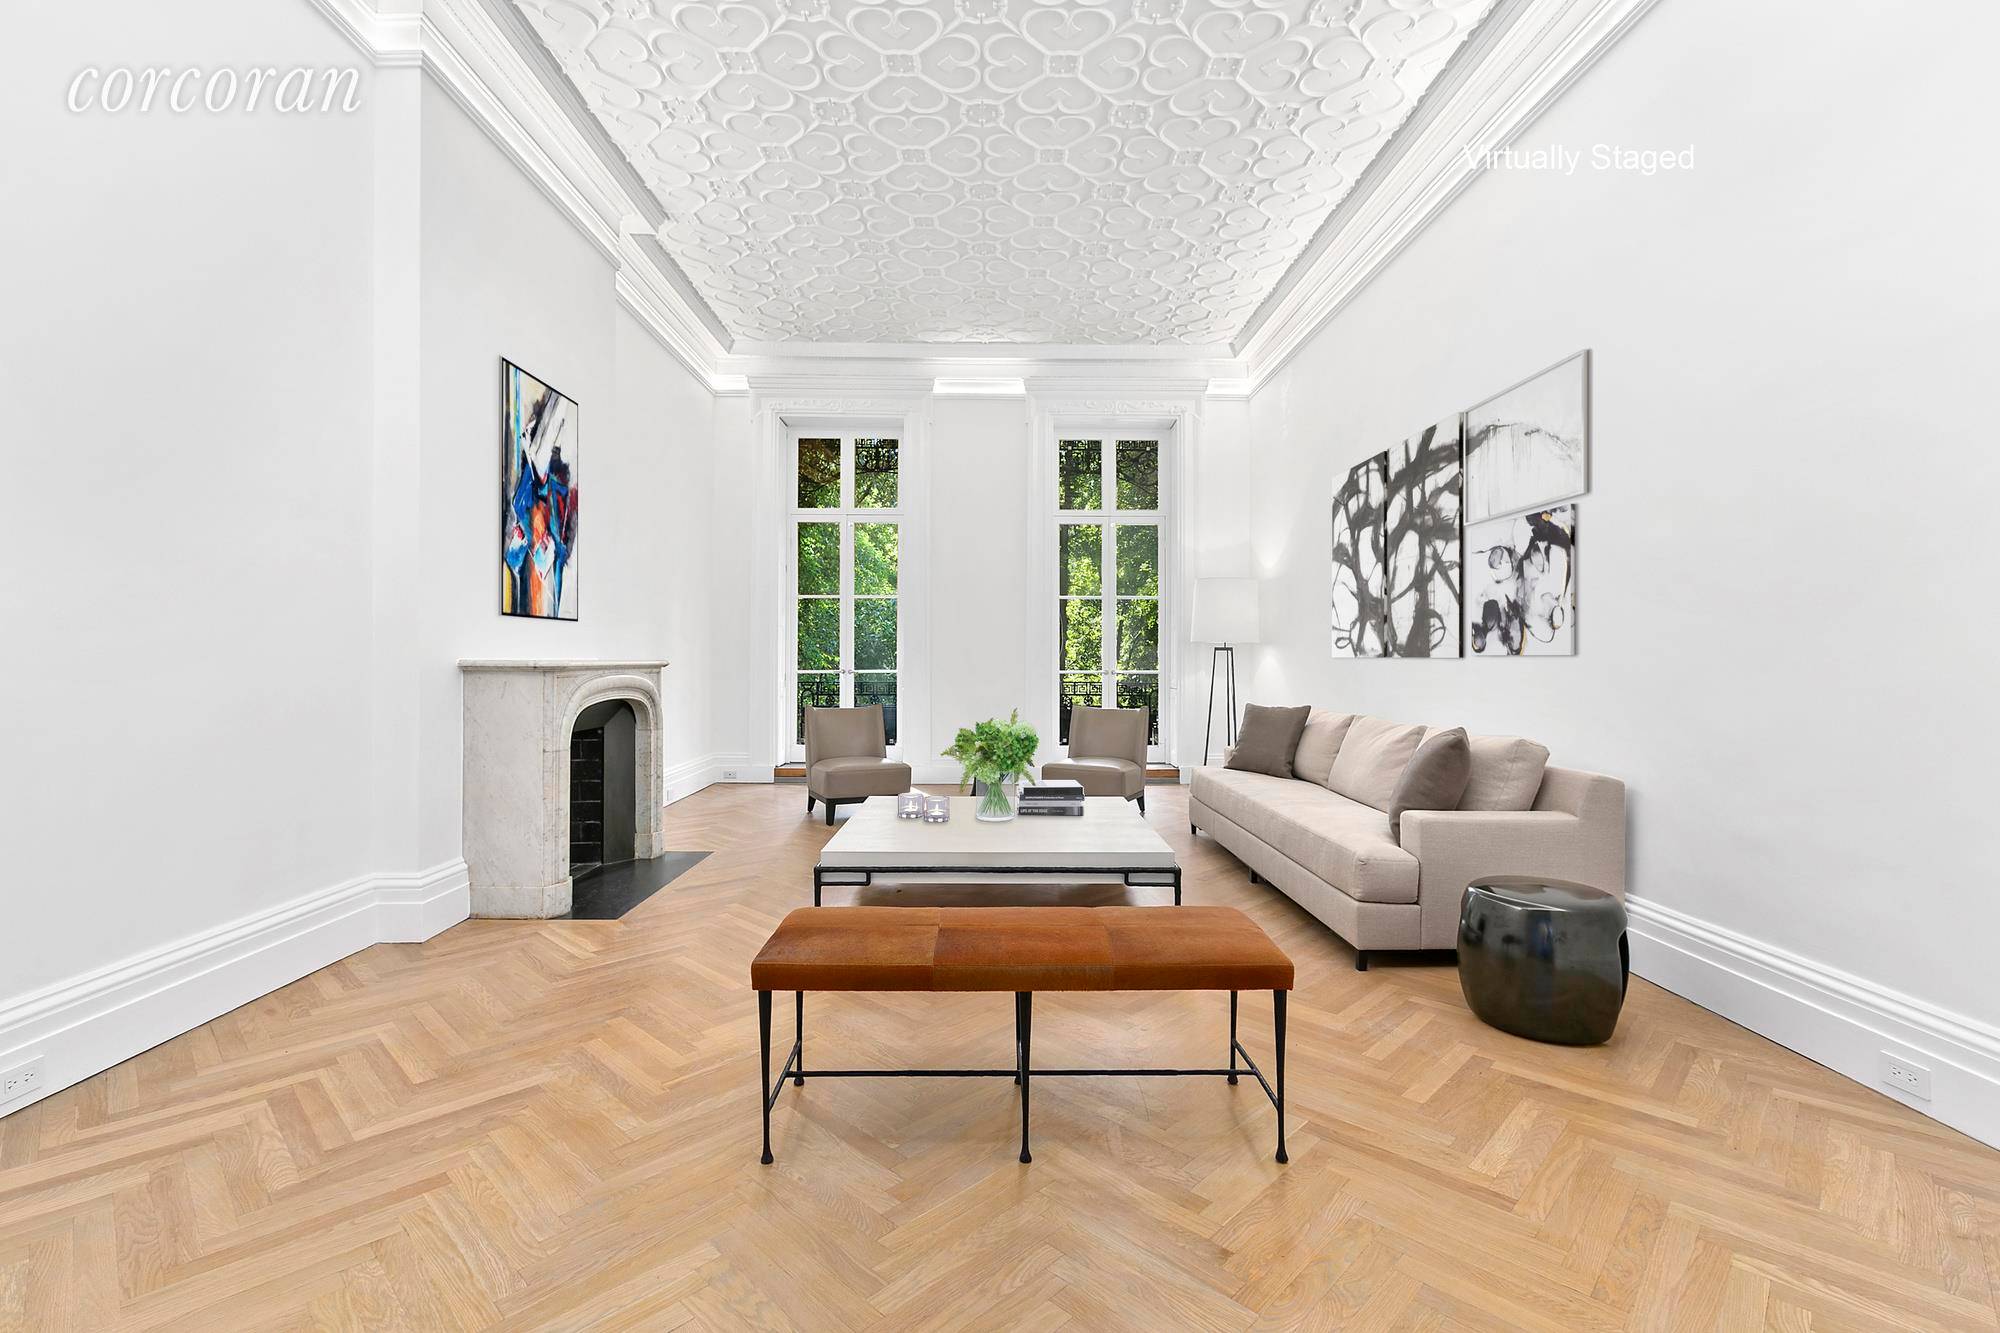 Rare opportunity to rent an elegant, newly renovated parlor floor apartment facing Gramercy Park, in an 1840's Greek Revival red brick townhouse.